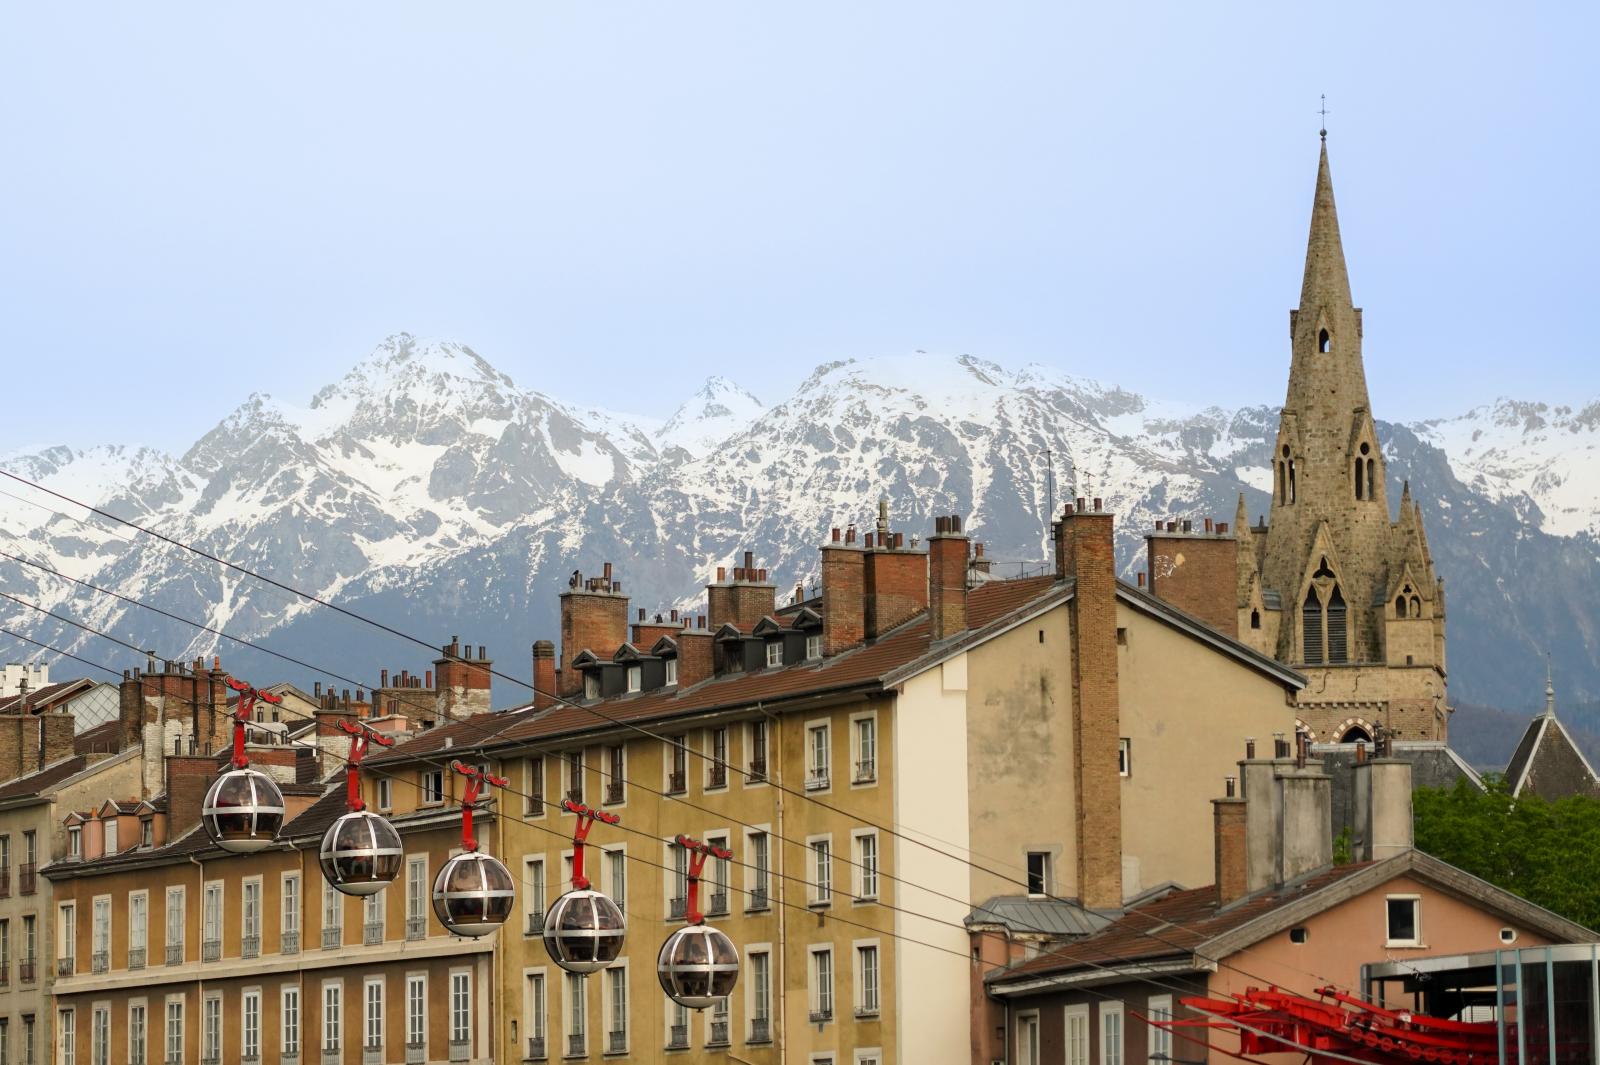 Grenoble-Bastille Cable Car: Aerial Ascent to Bastille | Buy this image